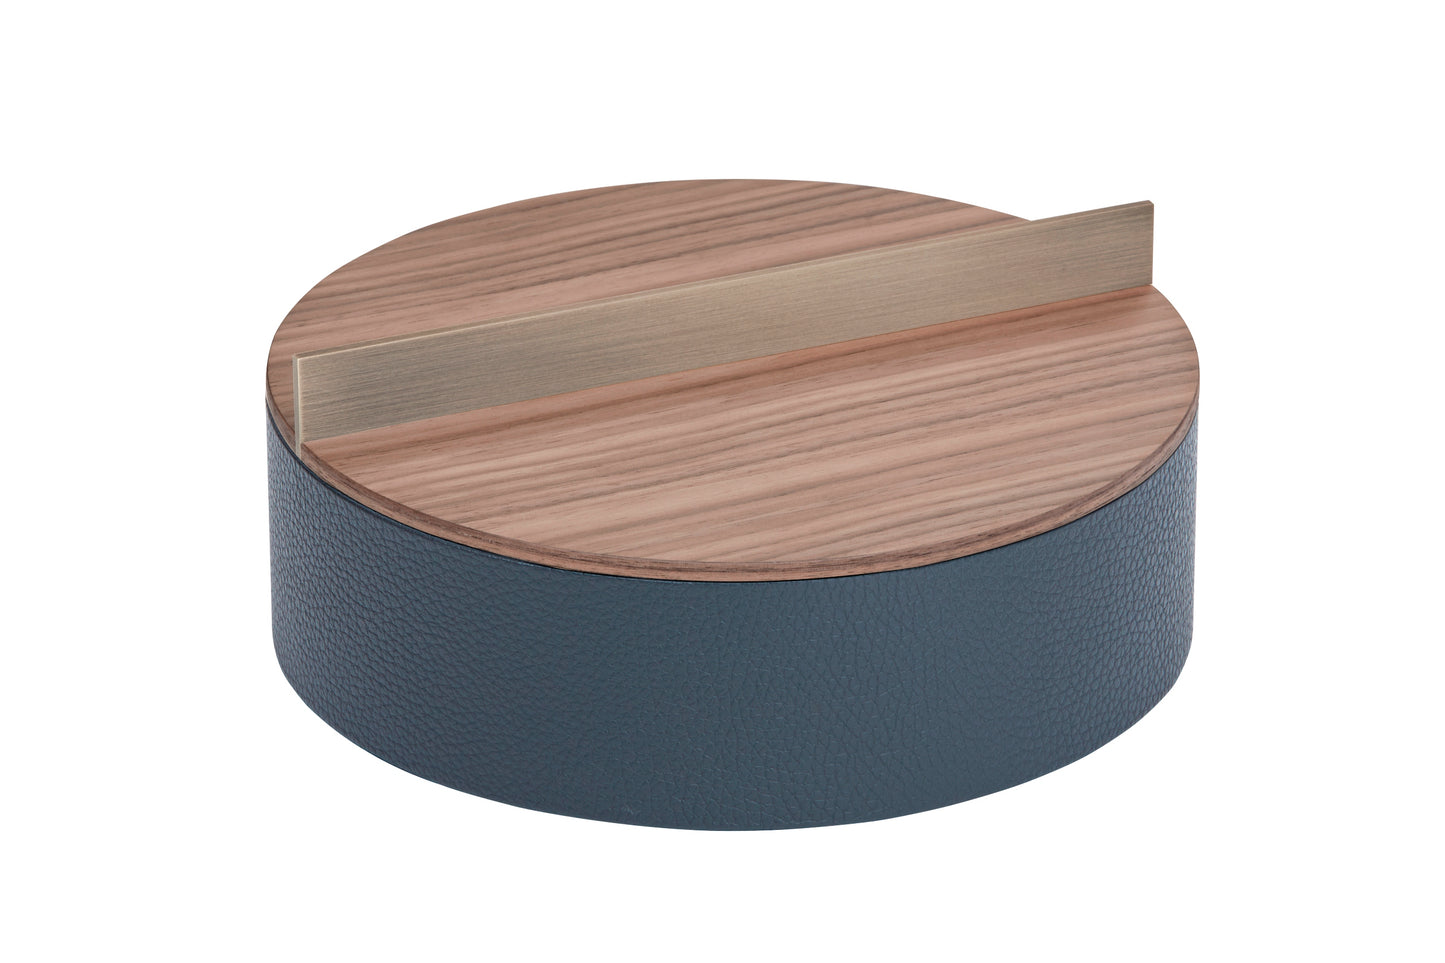 Riviere Dama Round Leather-Covered Wood Box With Brushed Metal Handle | Partially Covered in Leather | Available in Printed Calfskin Deer or Nabuk Finishes | Explore Luxury Wood Boxes at 2Jour Concierge, #1 luxury high-end gift & lifestyle shop